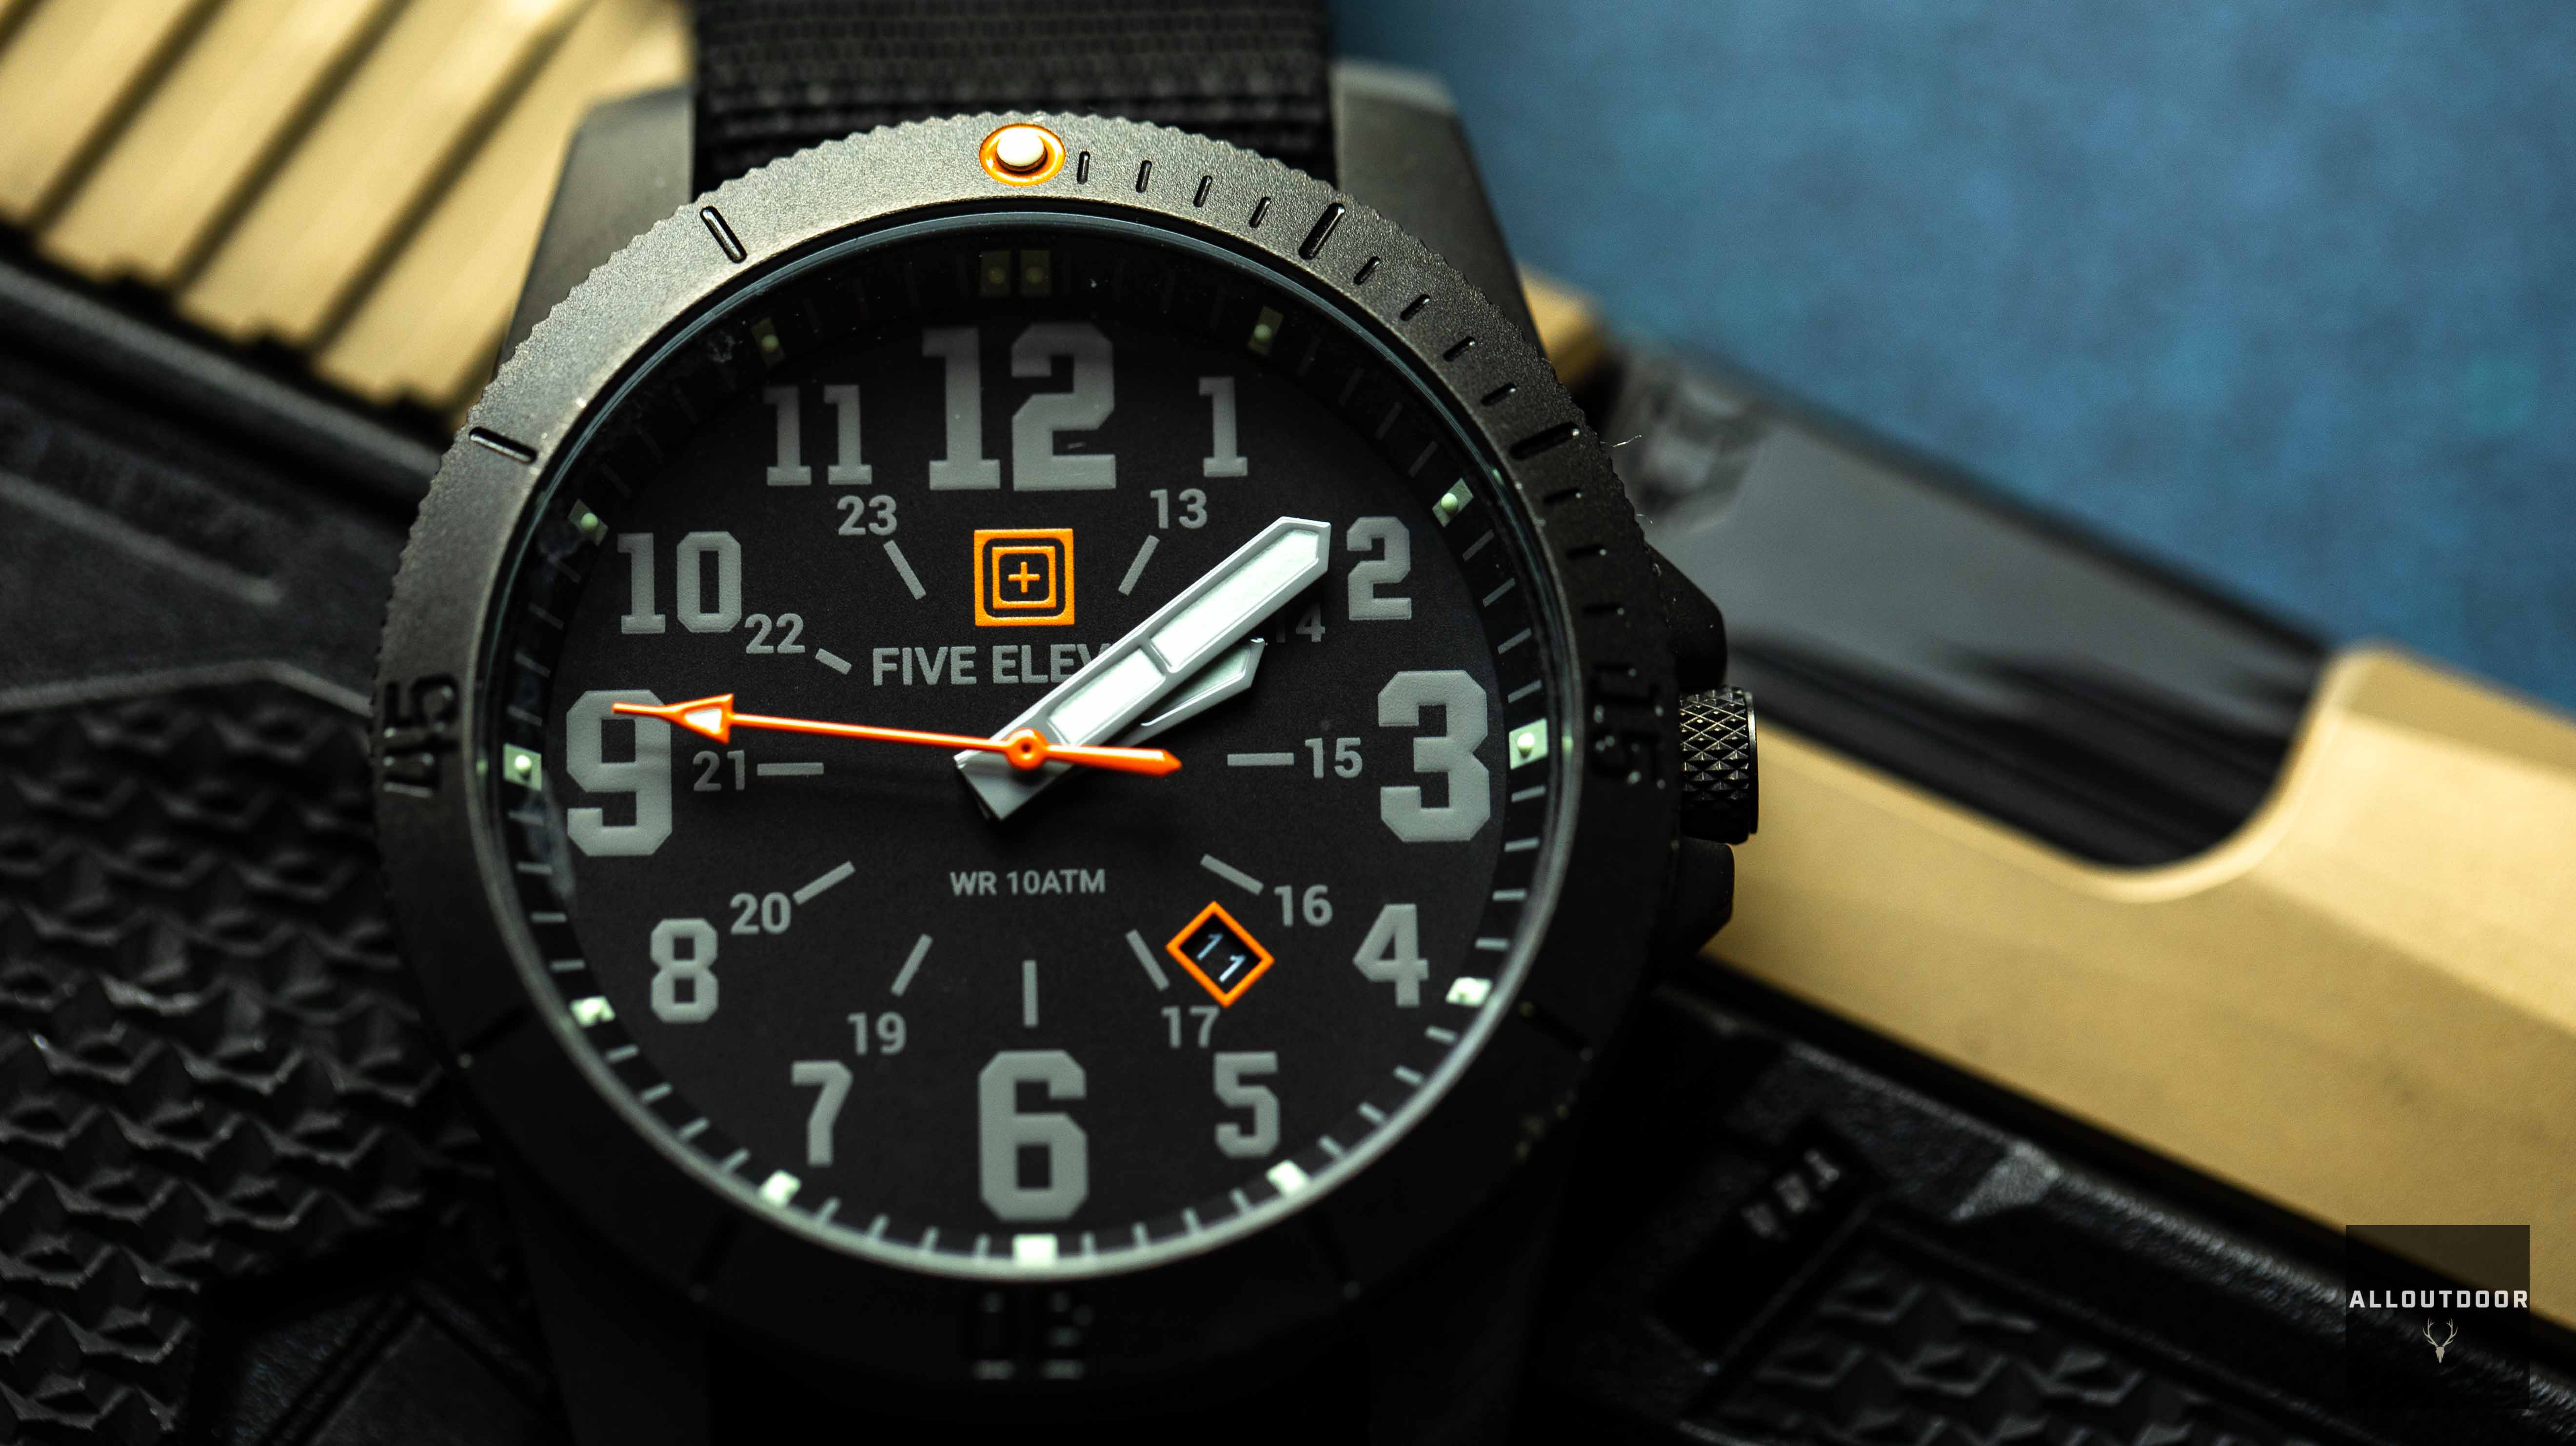 AllOutdoor Review: 5.11 Tactical Field Watch 2.0 - Classical Aesthetic